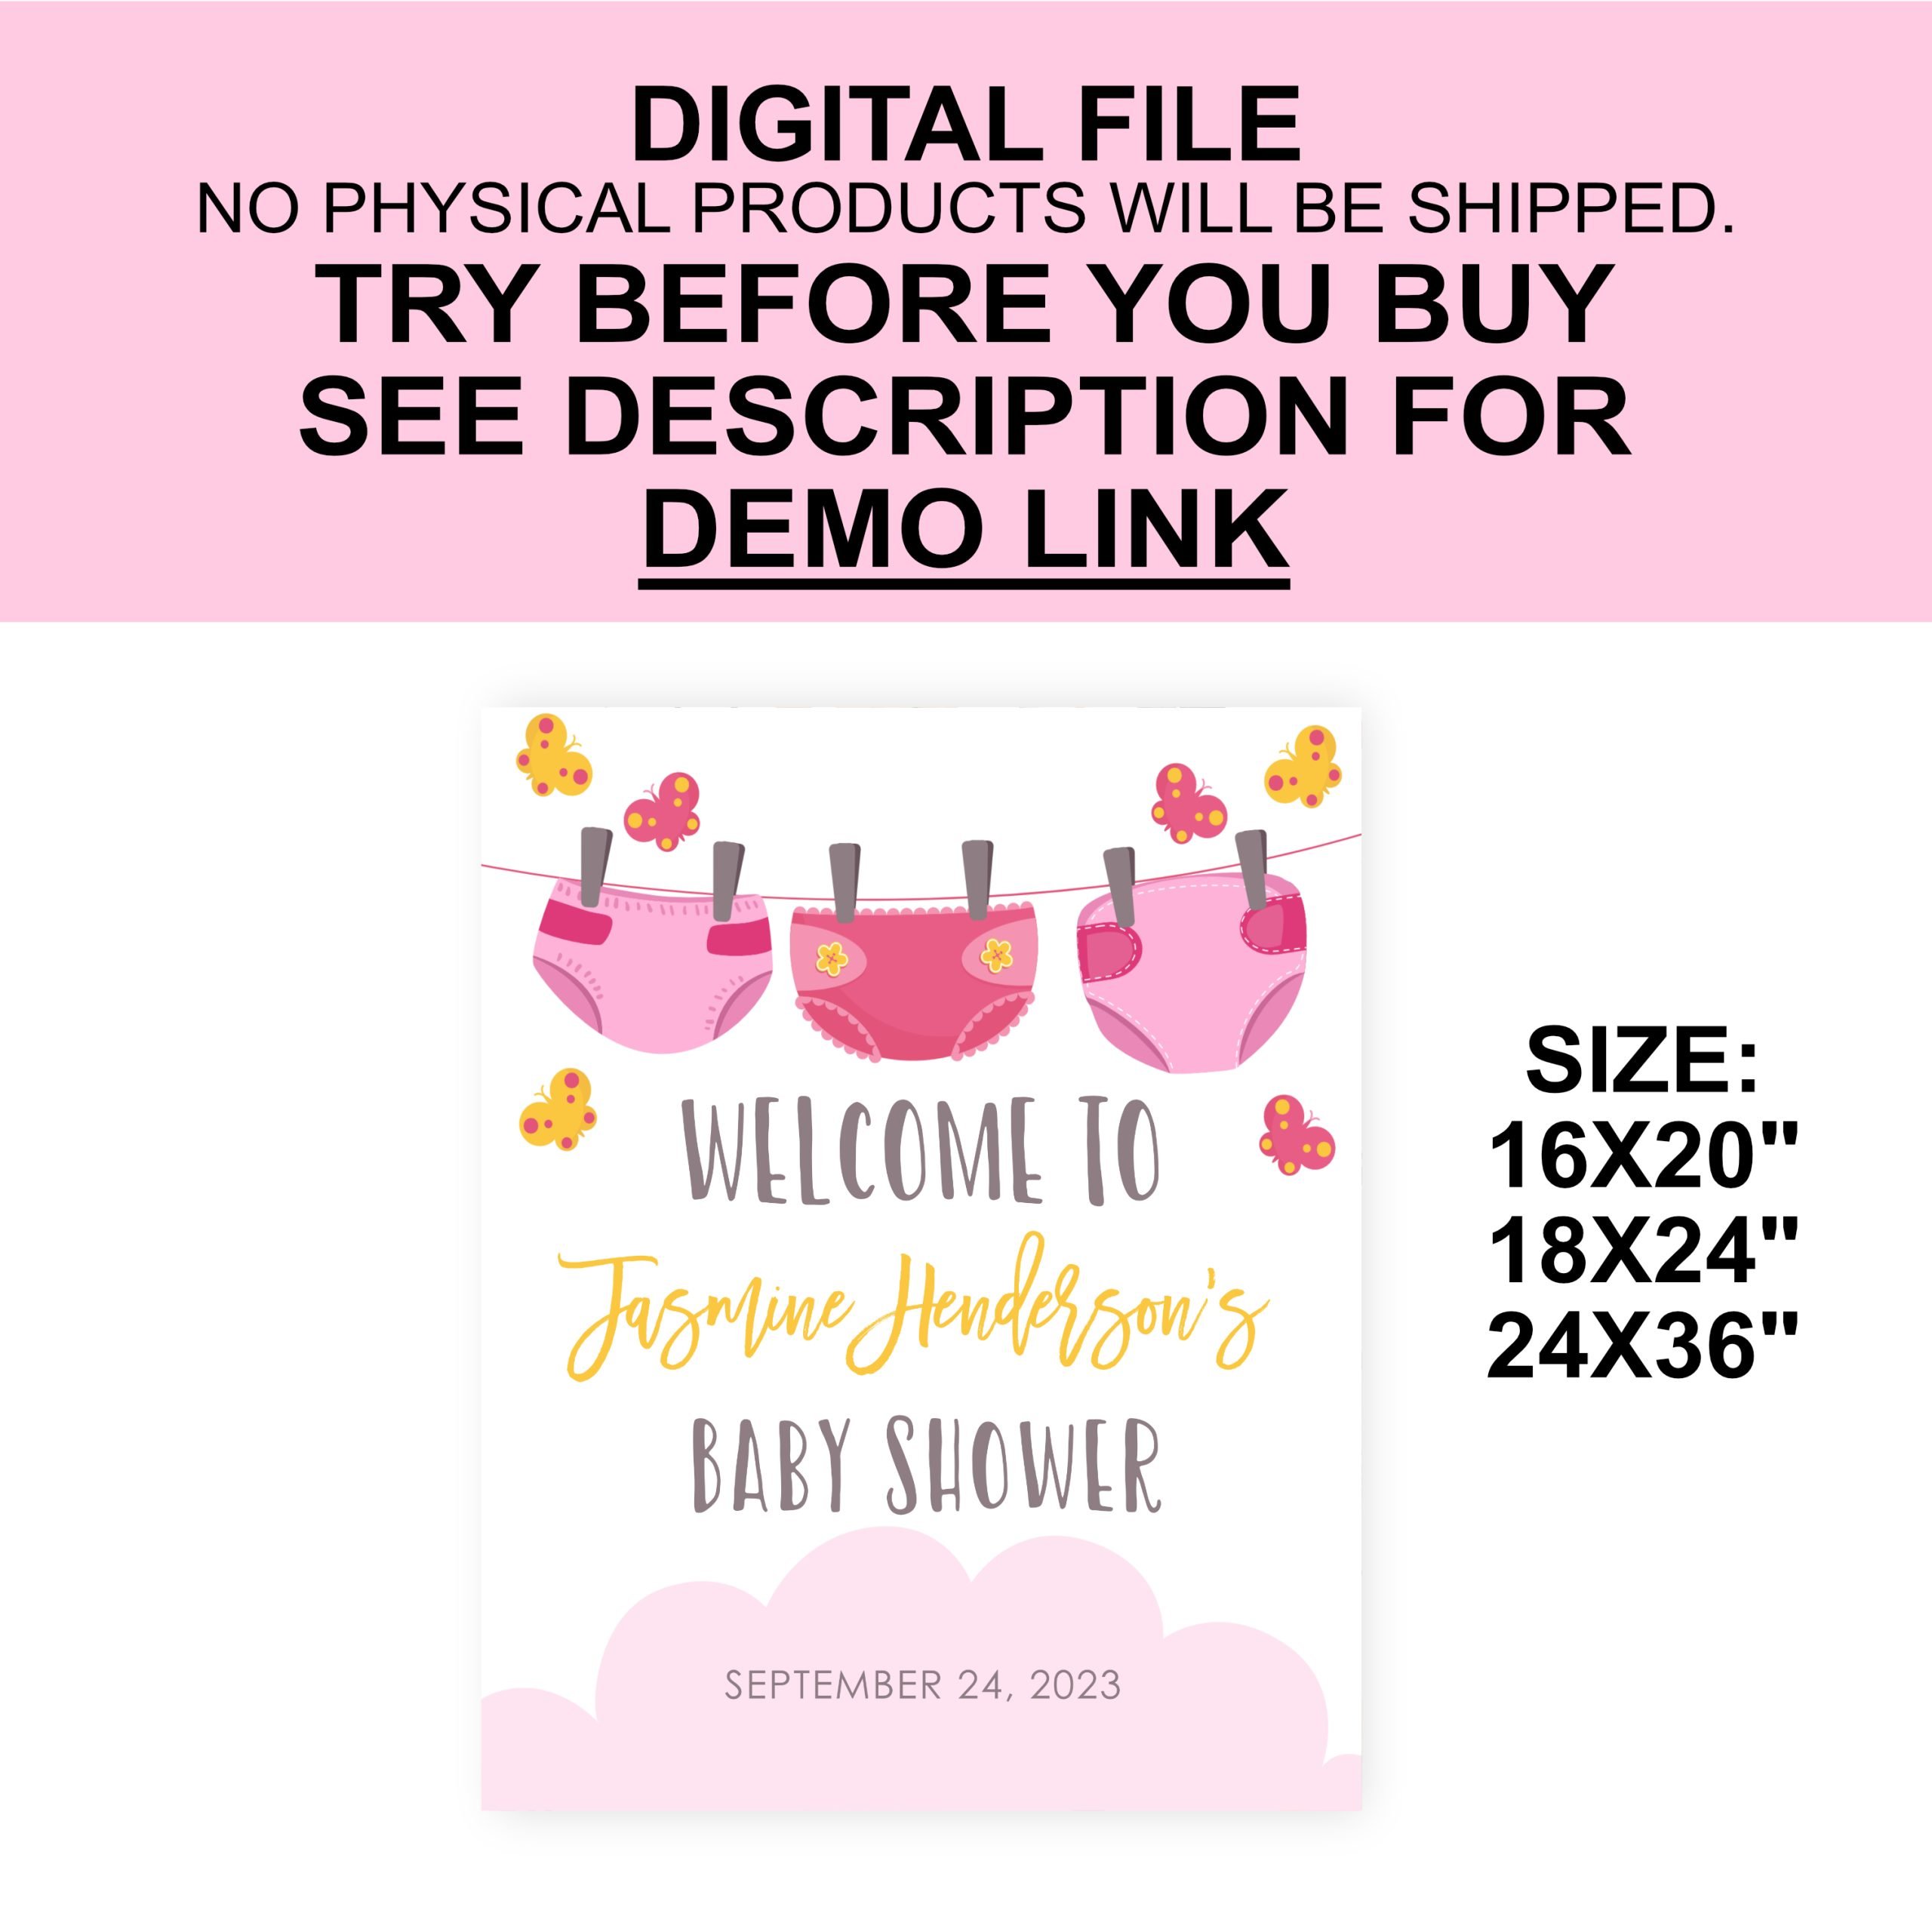 DECOR | SIGNS Editable Diaper and Wipes Welcome Sign – Pink Diapers Girl Baby Shower Welcome Decor Baby Shower Decor